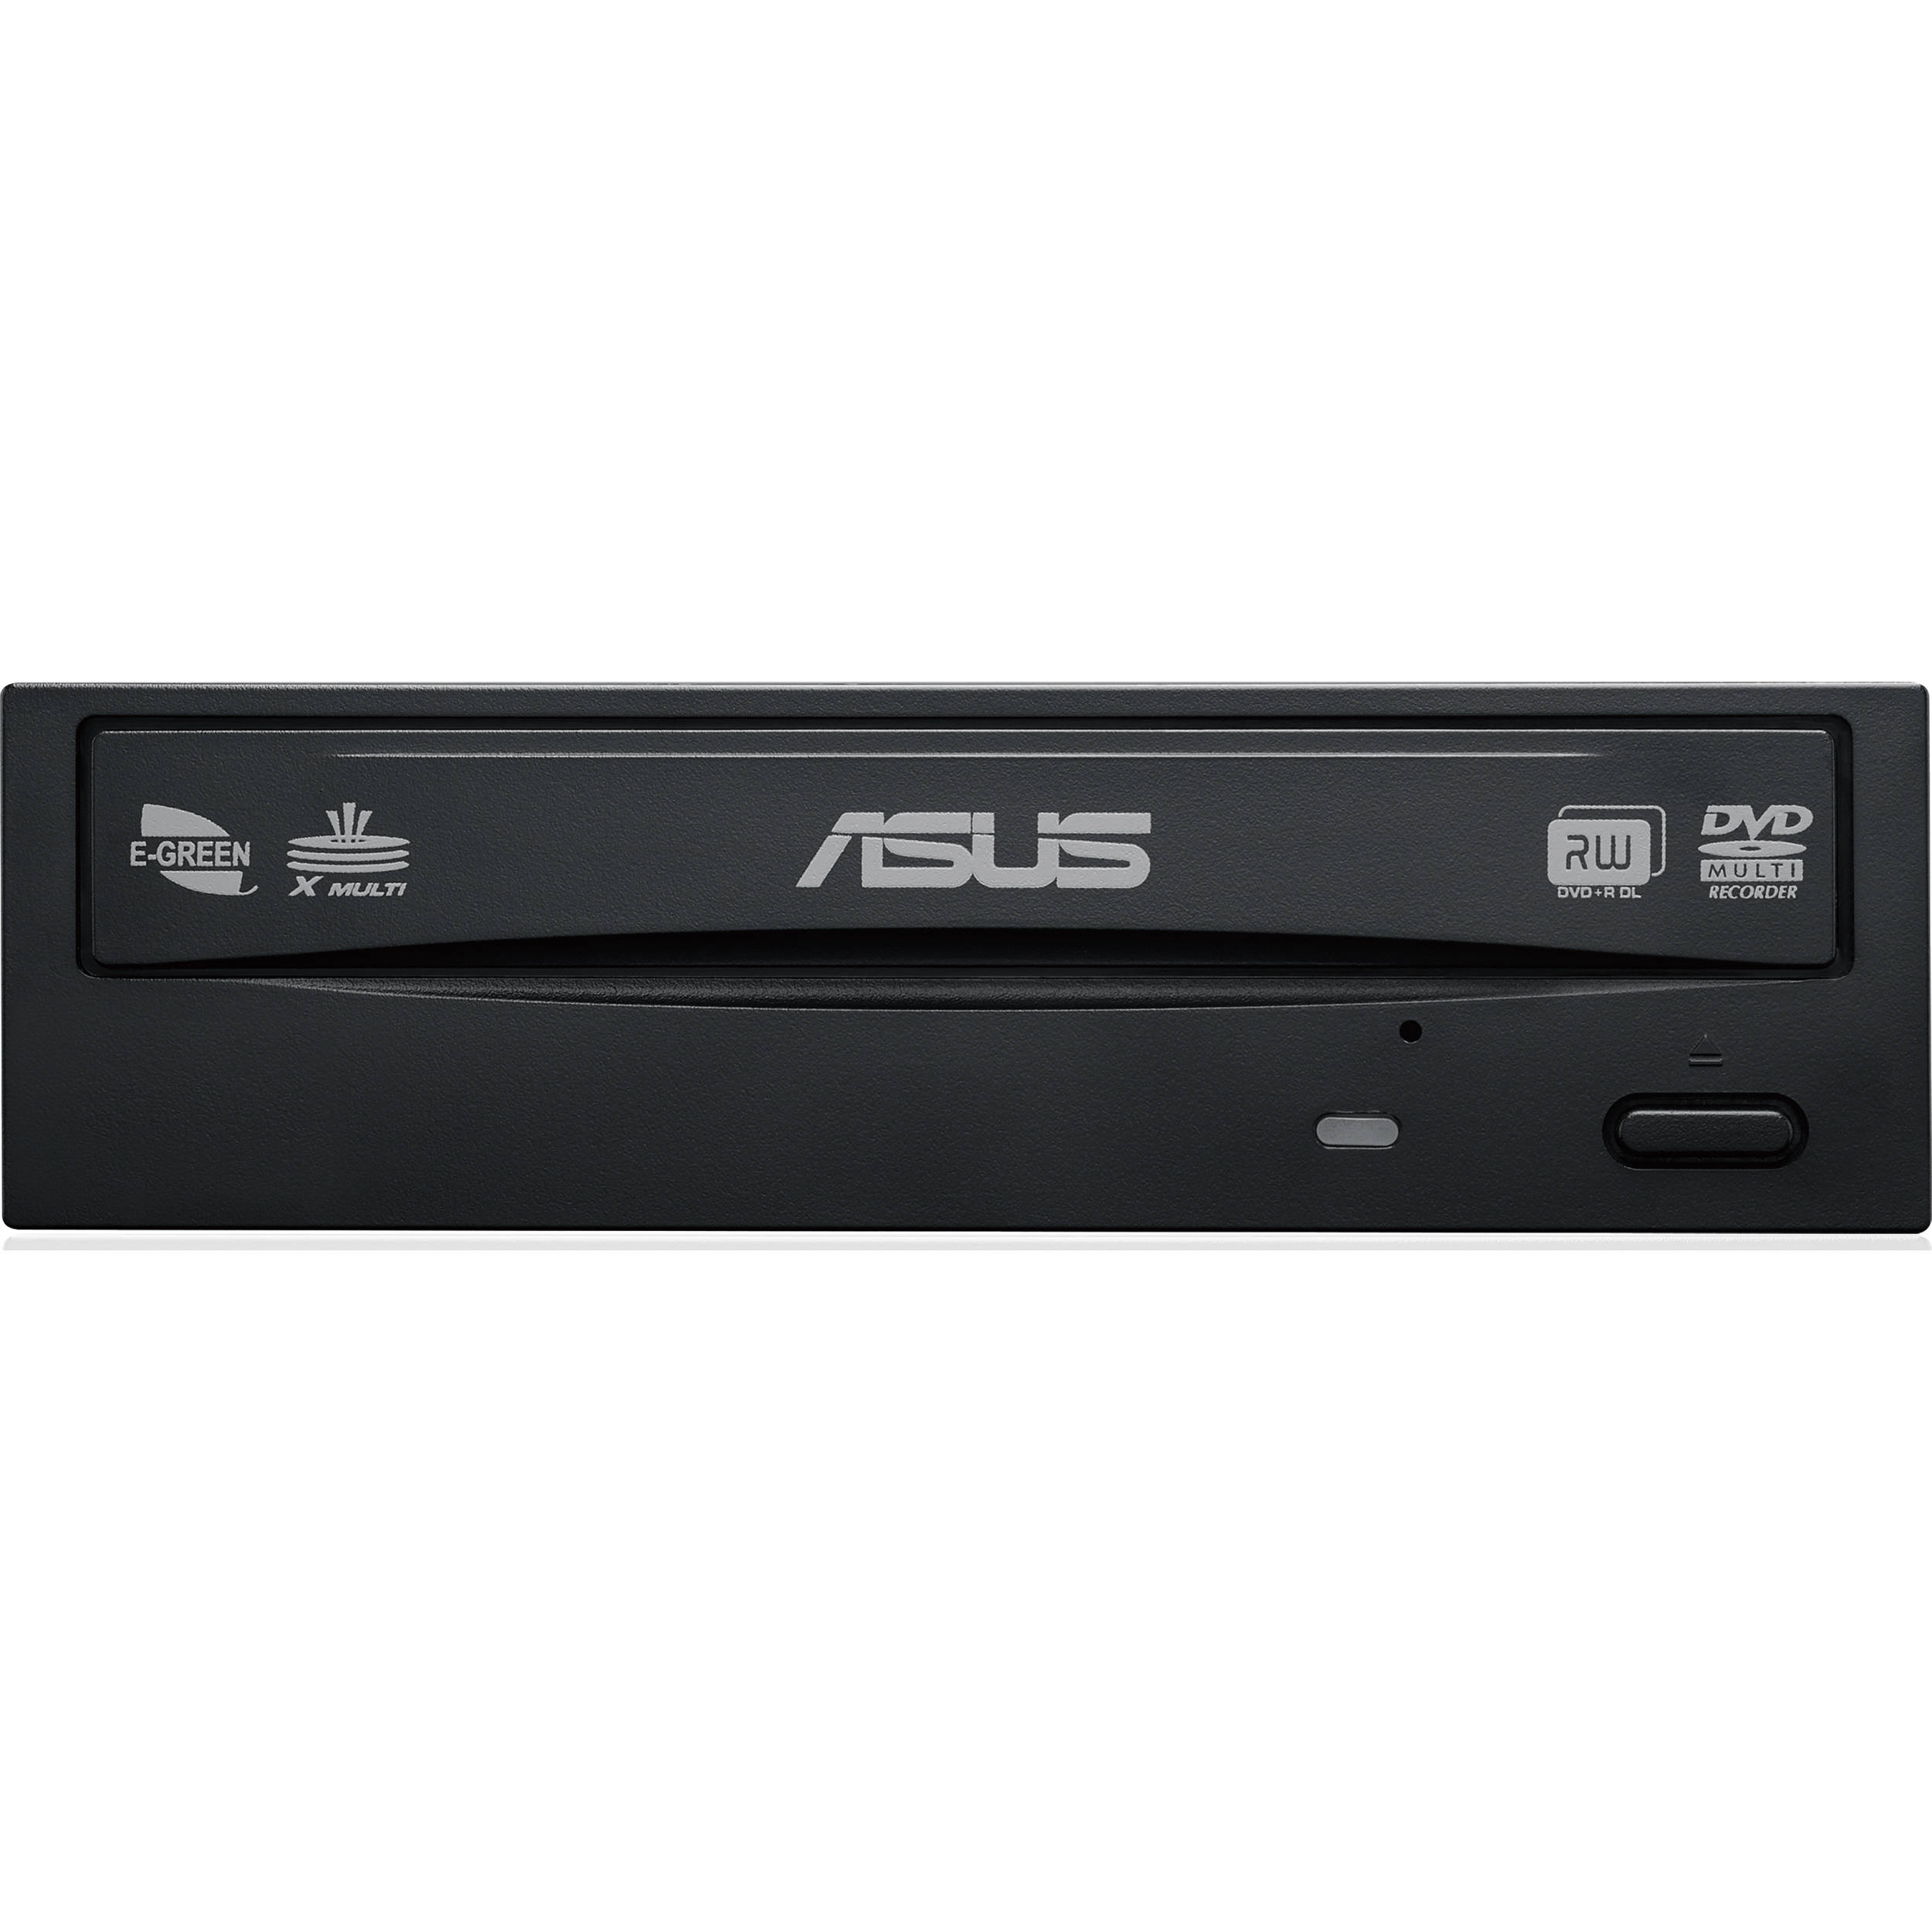 asus atk drivers for windows 7atk driver